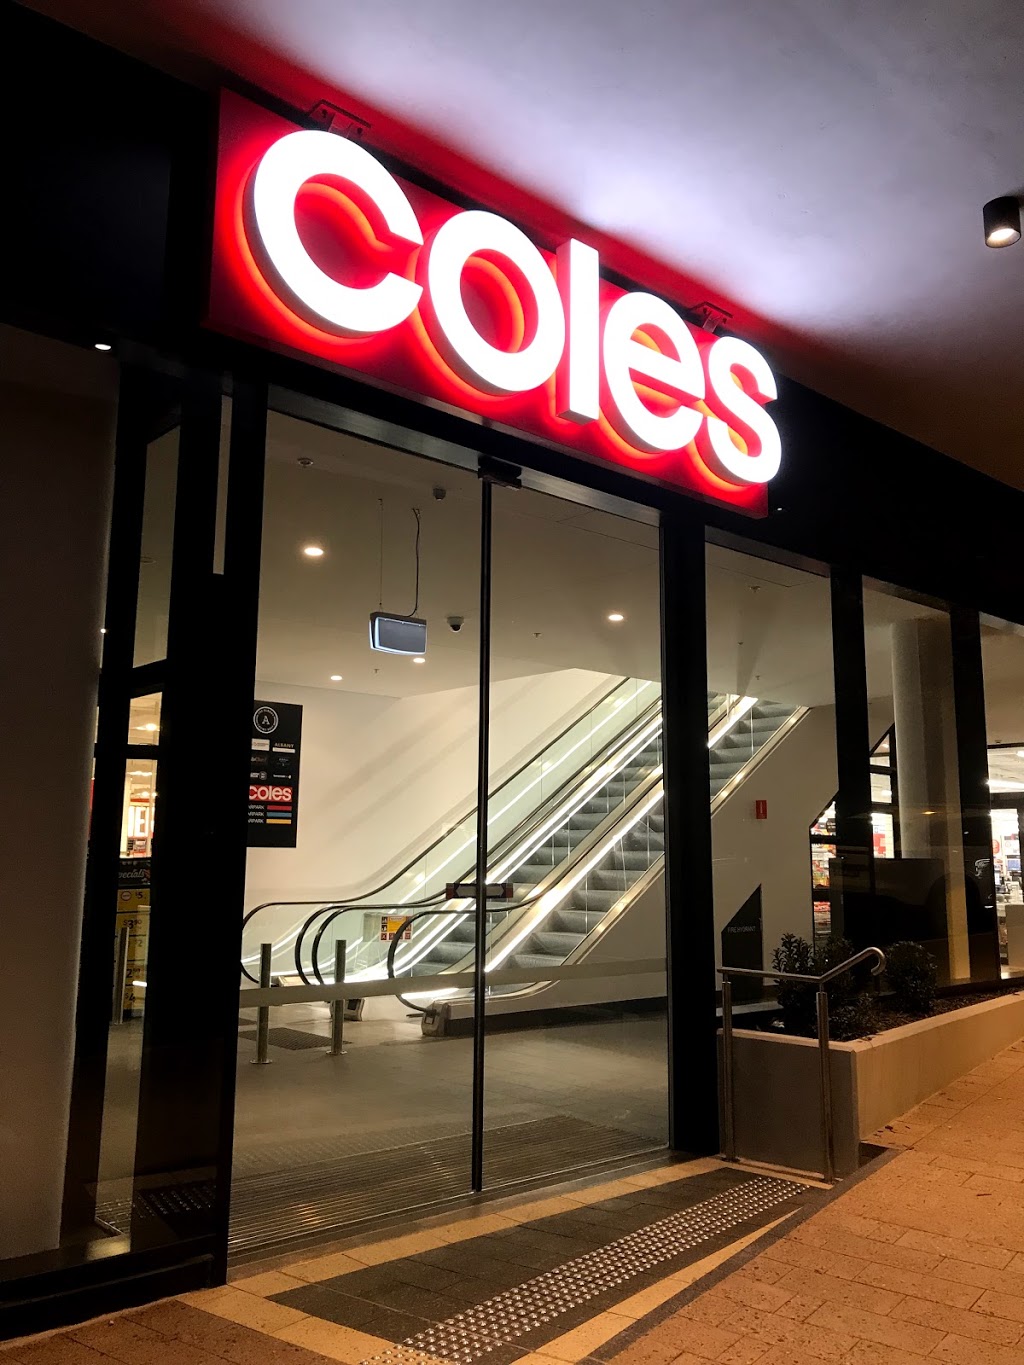 Coles Crows Nest | supermarket | 101-110 Willoughby Rd, Crows Nest NSW 2065, Australia | 0279559100 OR +61 2 7955 9100